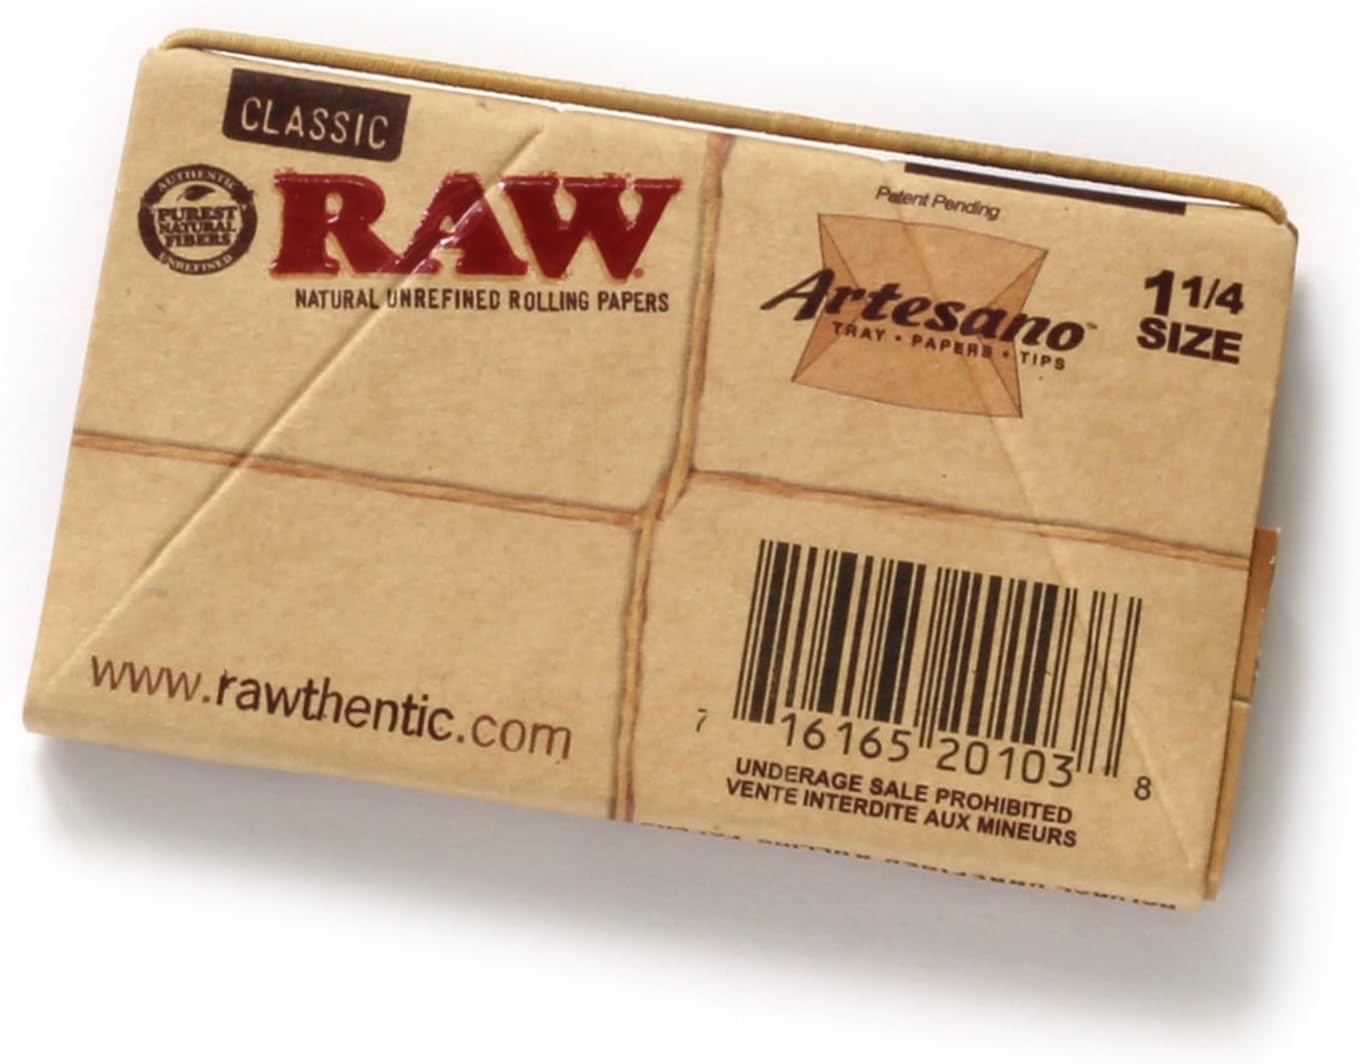 RAW ROLLING PAPERS - ARTESANO 1 1/4